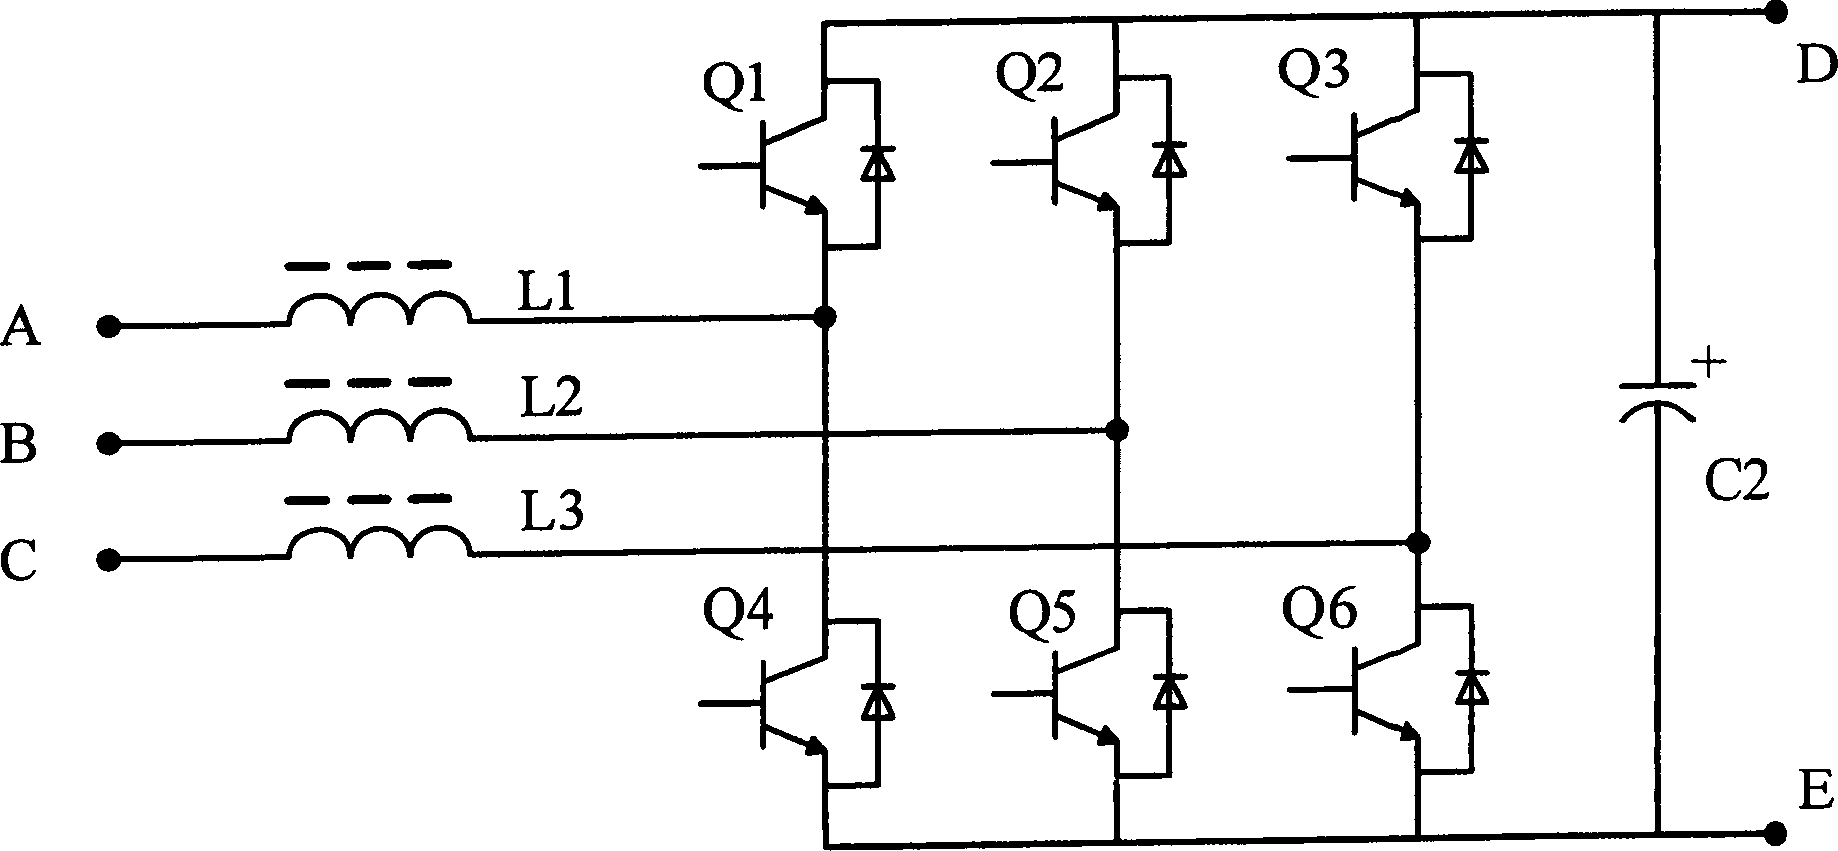 Circuit apparatus applicable to middle and high power UPS